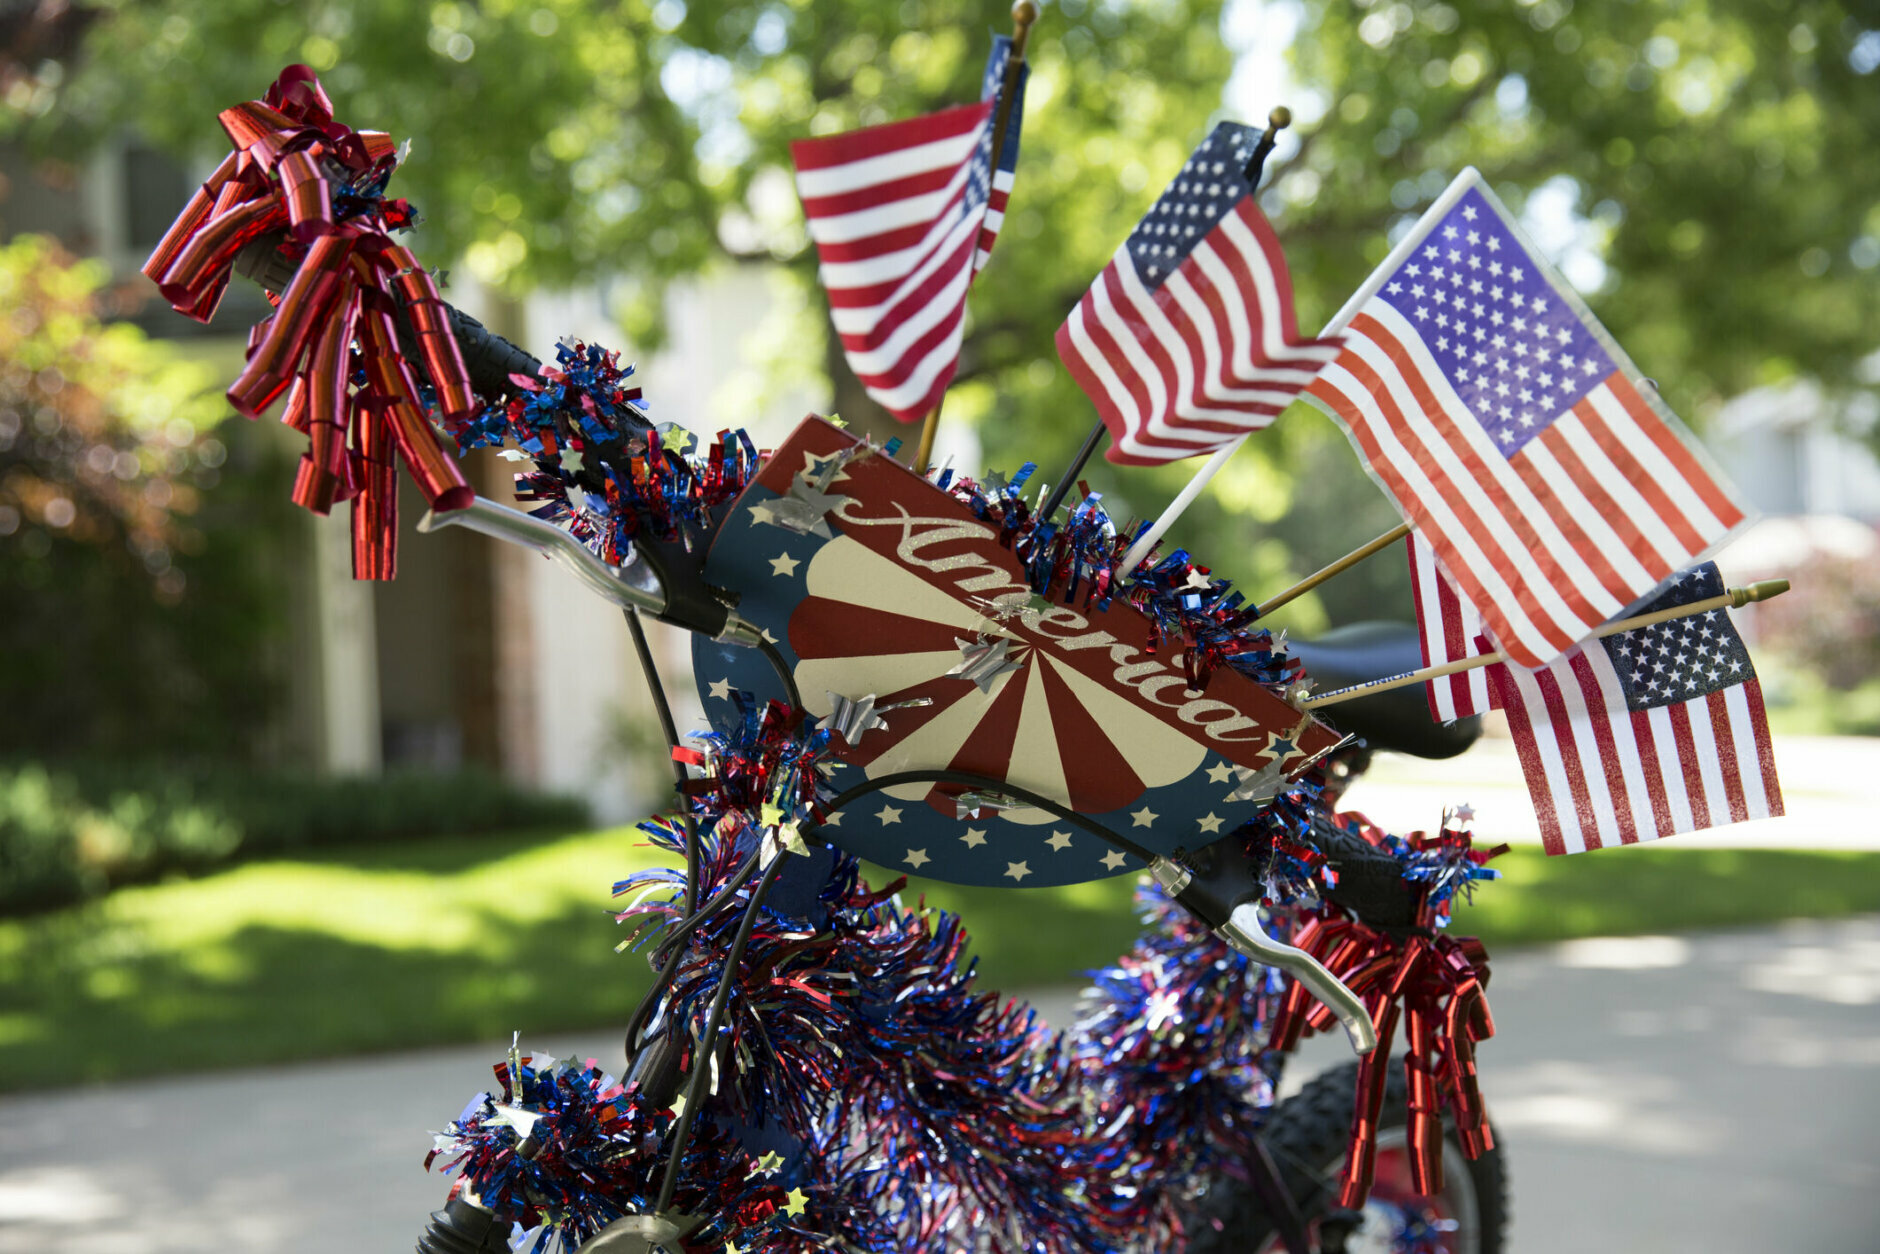 Bike decorated for July 4th parade